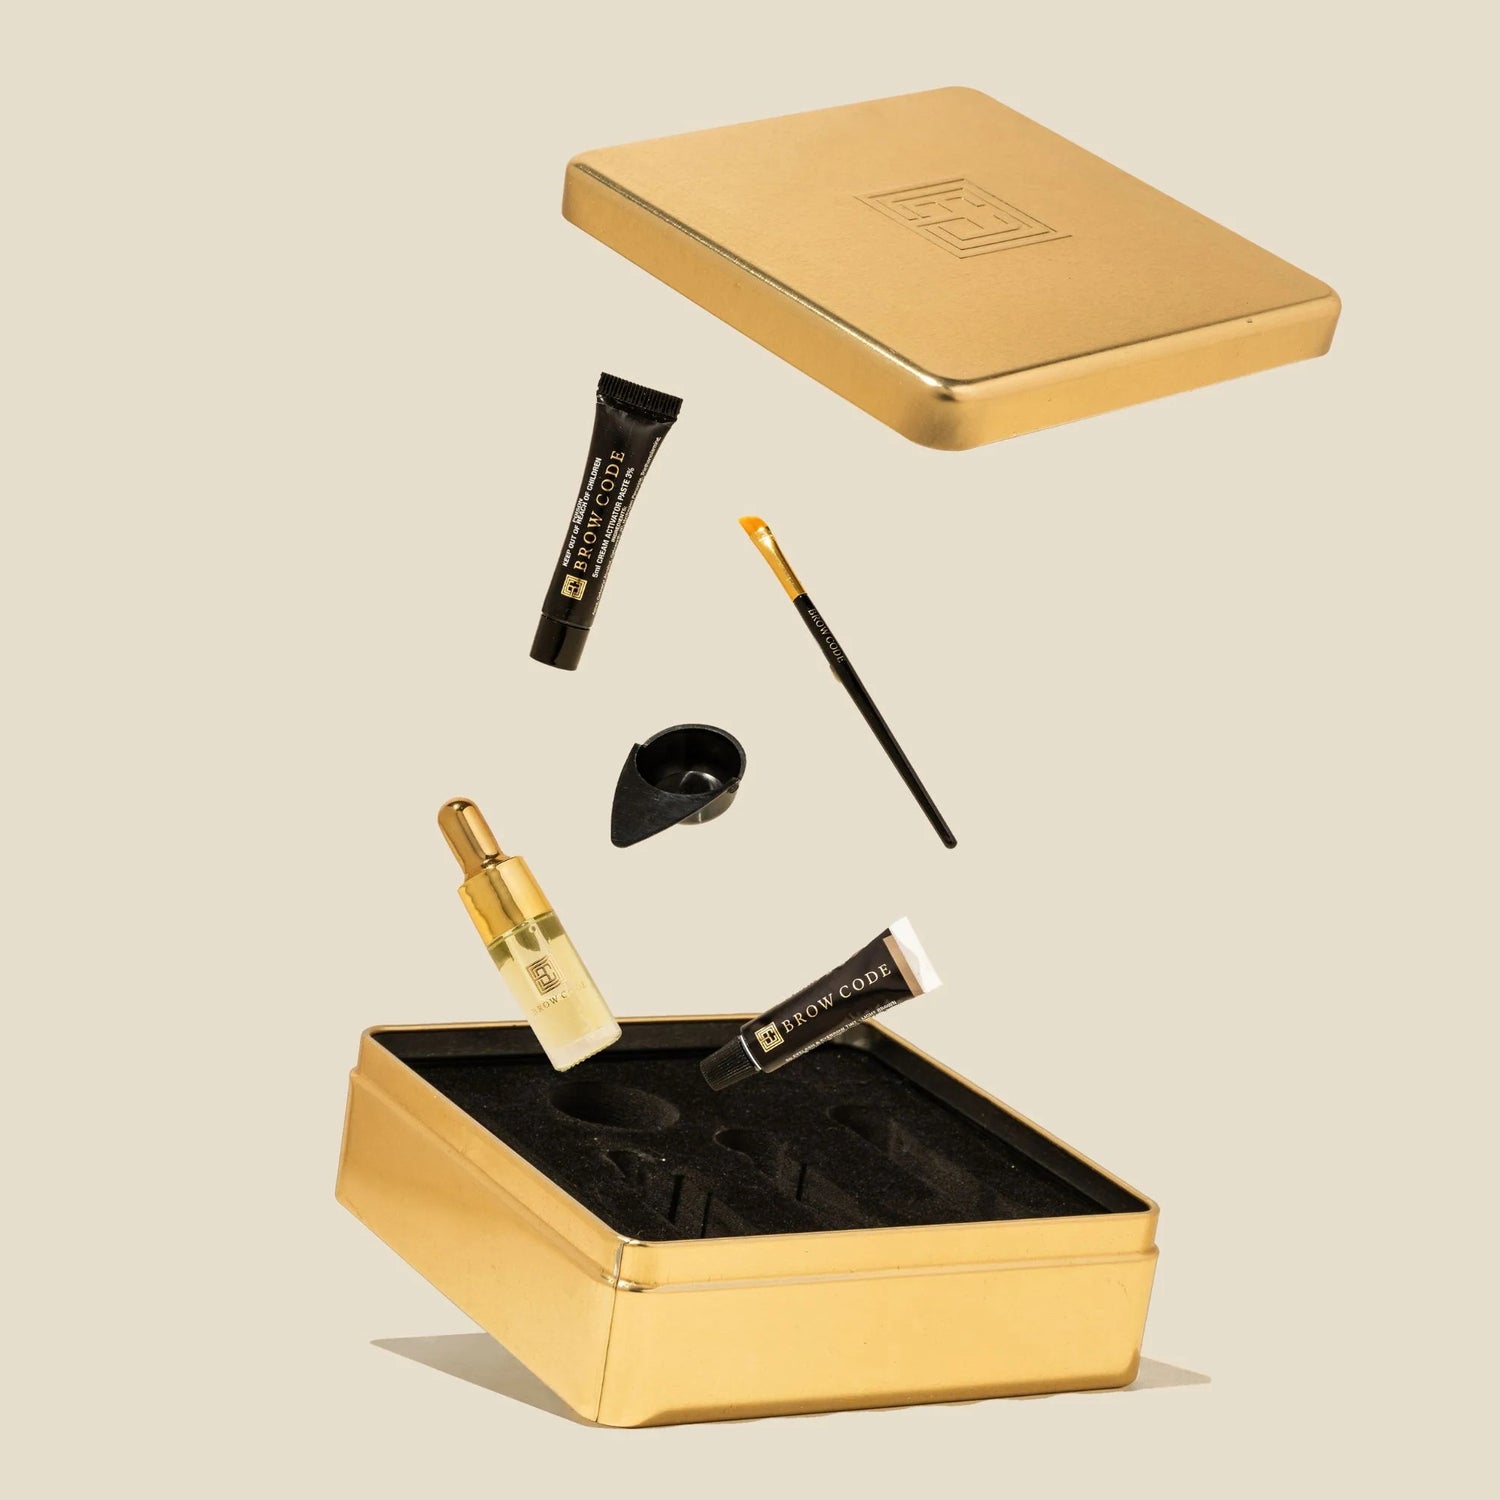 Stylised image of the brow tint kit